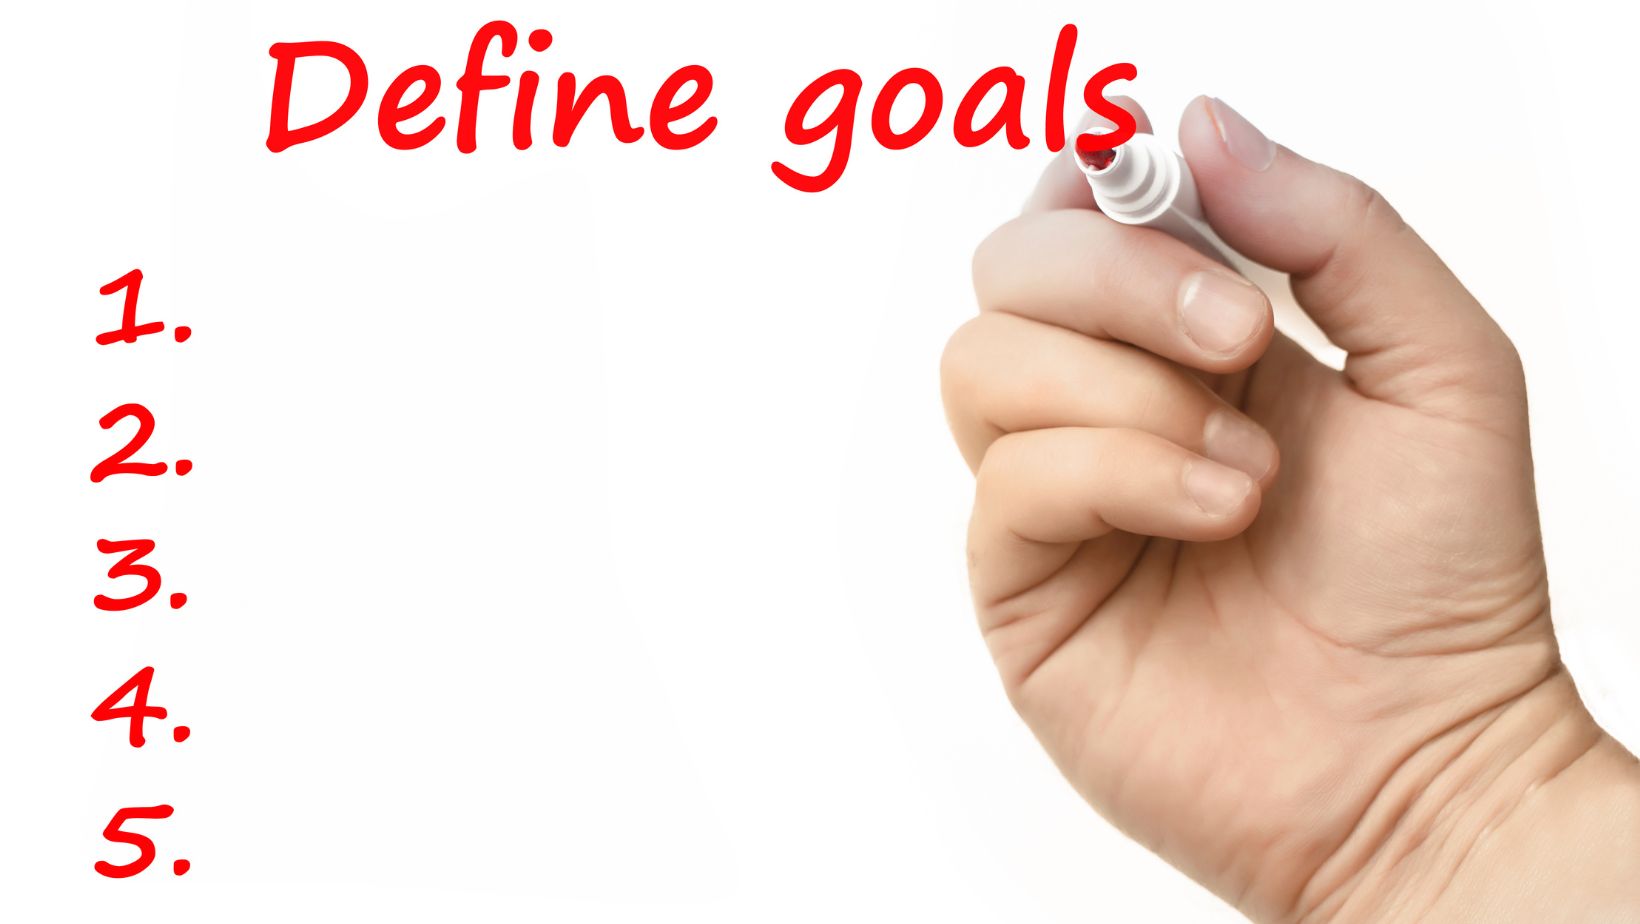 describe the ideal qualities of time management goals.